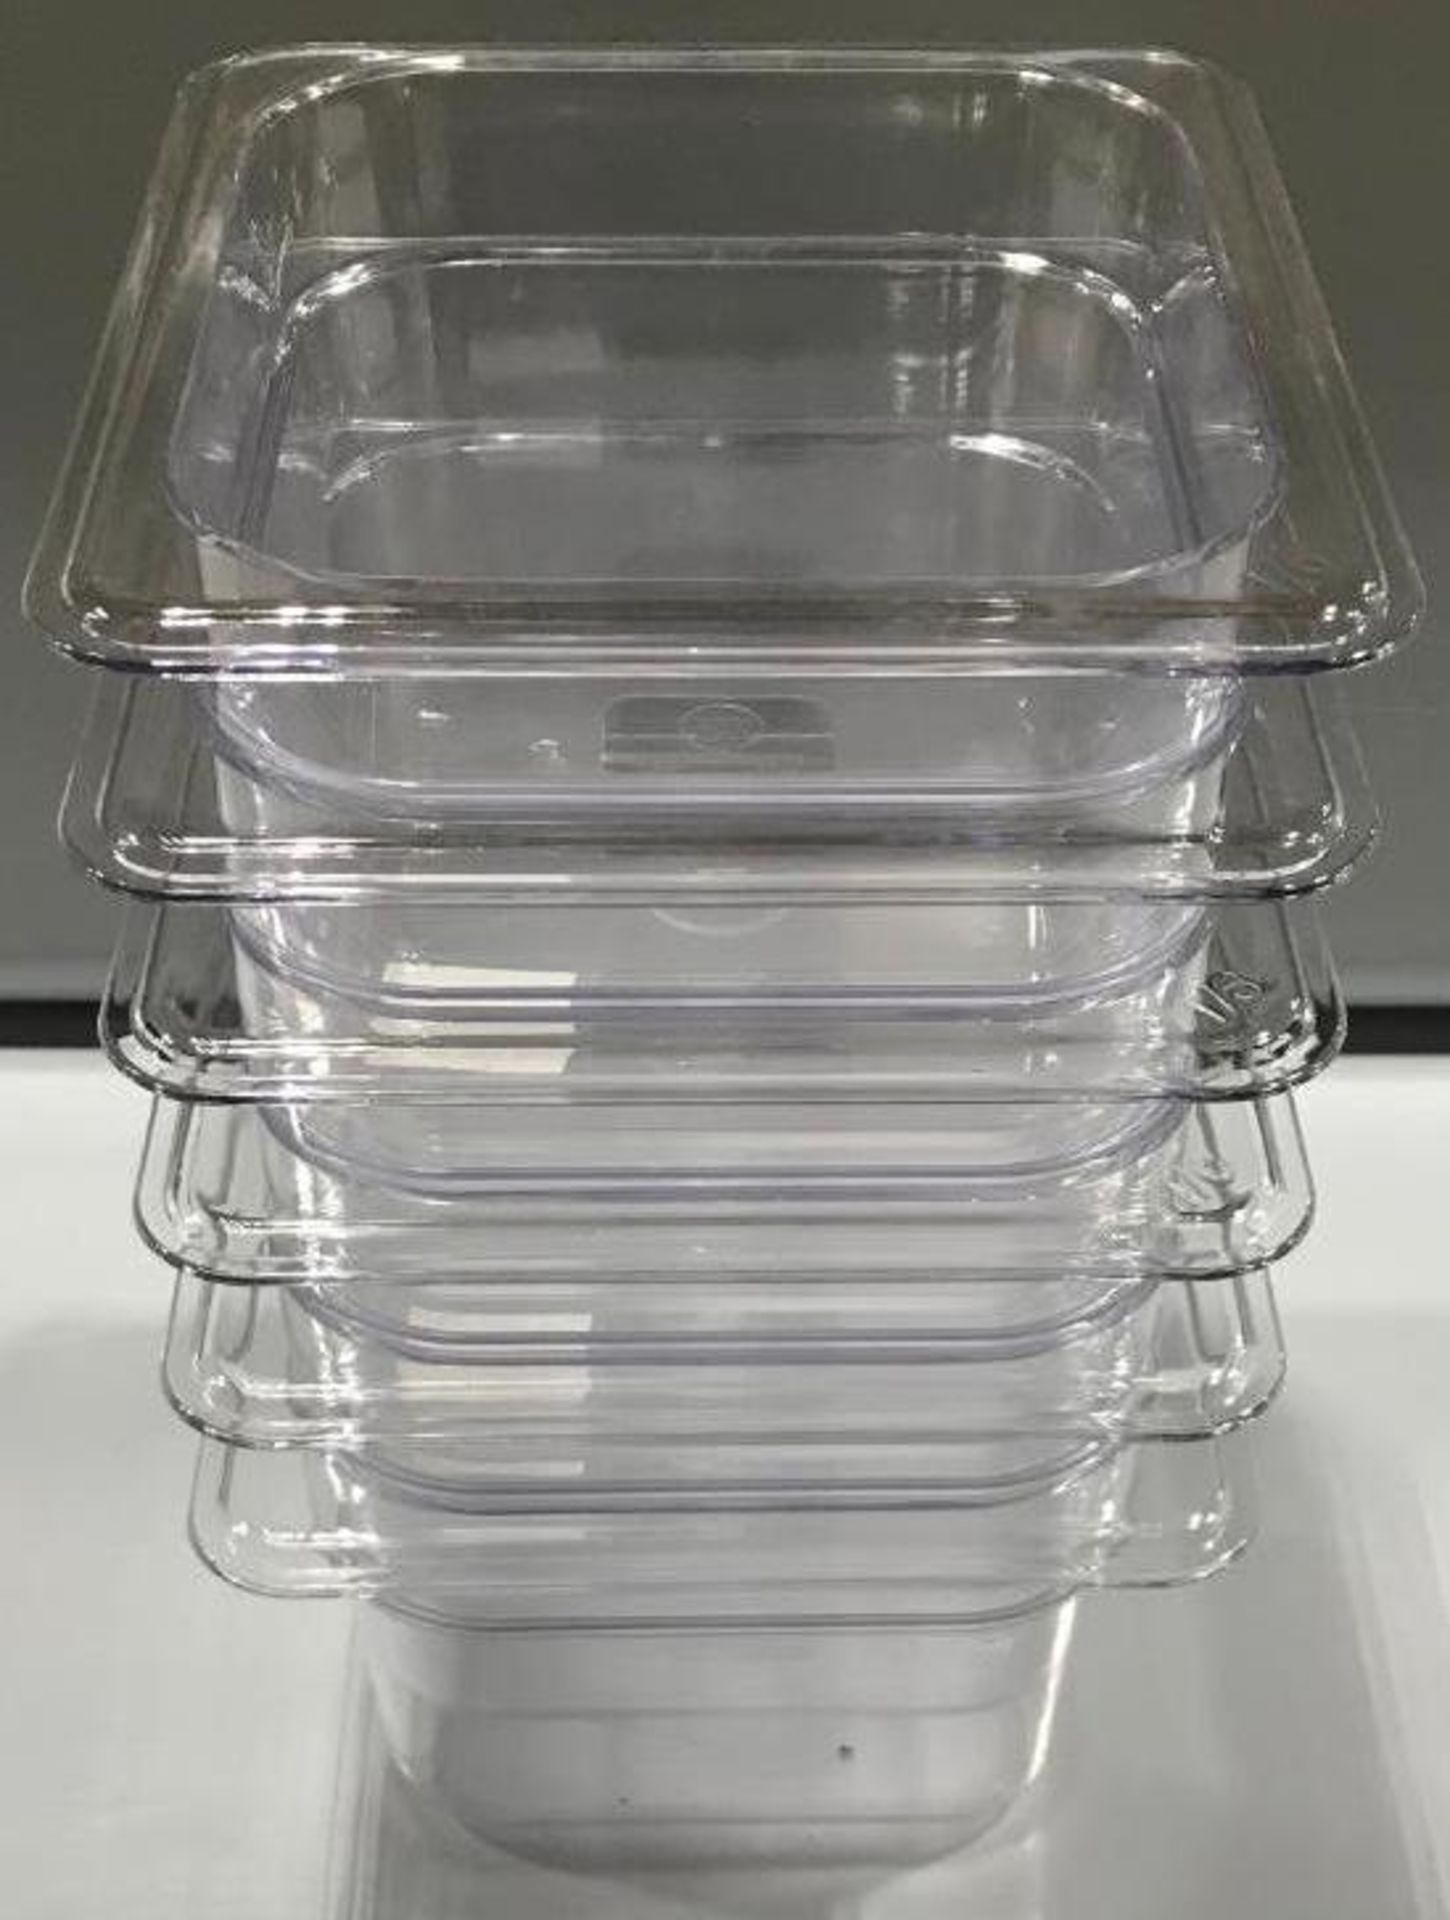 1/6 SIZE 4"/ 10CM DEEP POLYCARBONATE INSERT PANS, BROWNE 38164 - LOT OF 6 - NEW - Image 3 of 3